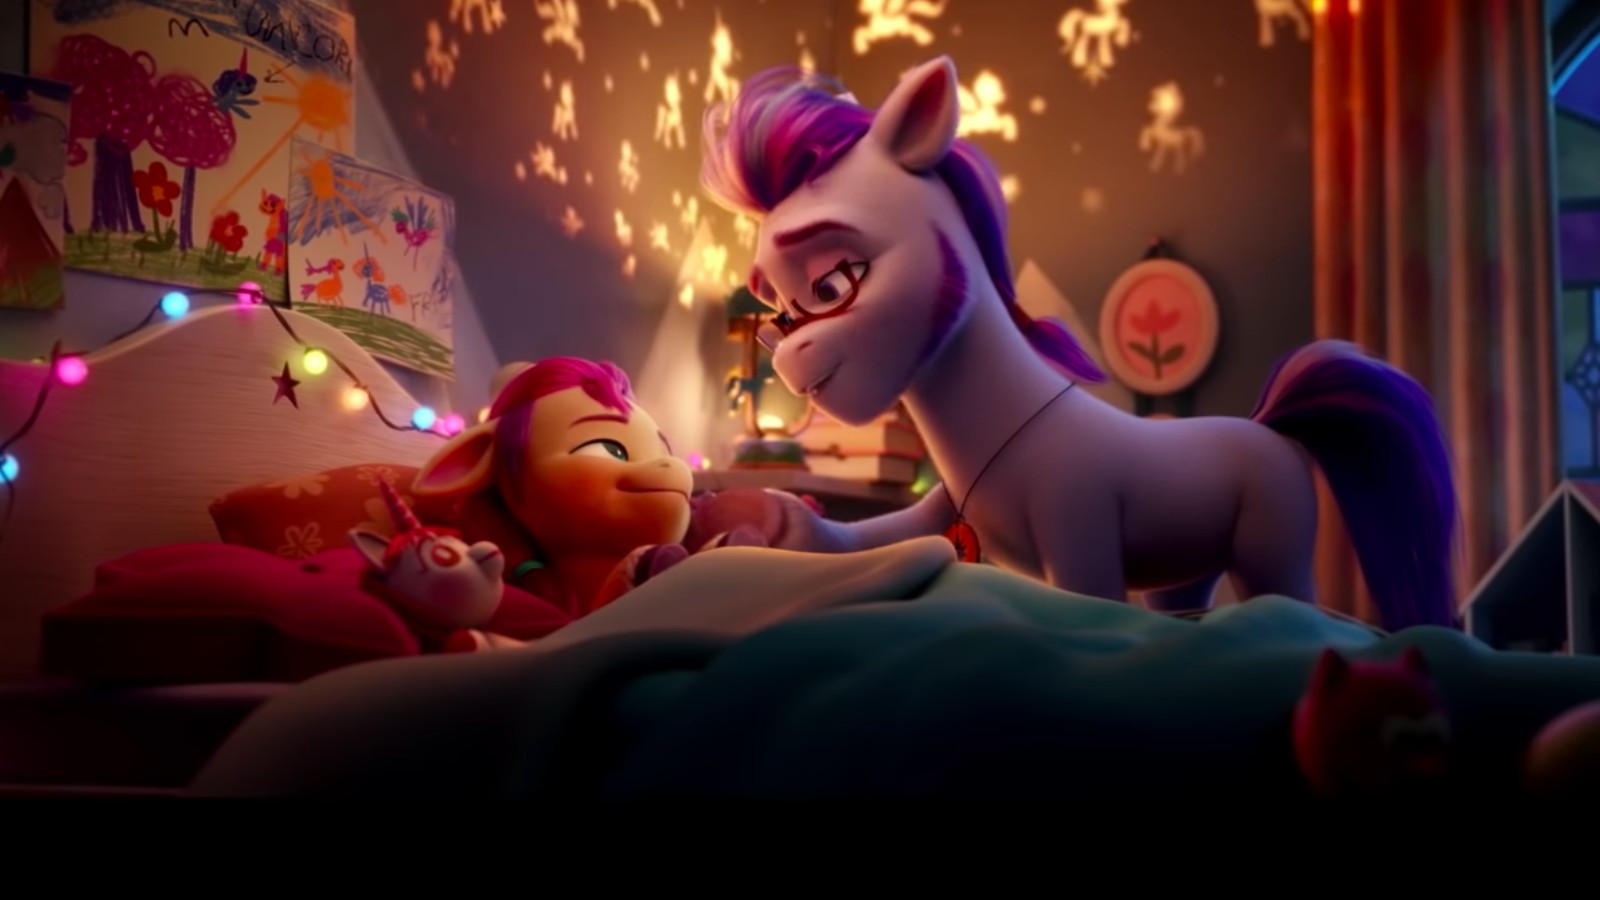 My Little Pony: A New Generation, released trailer